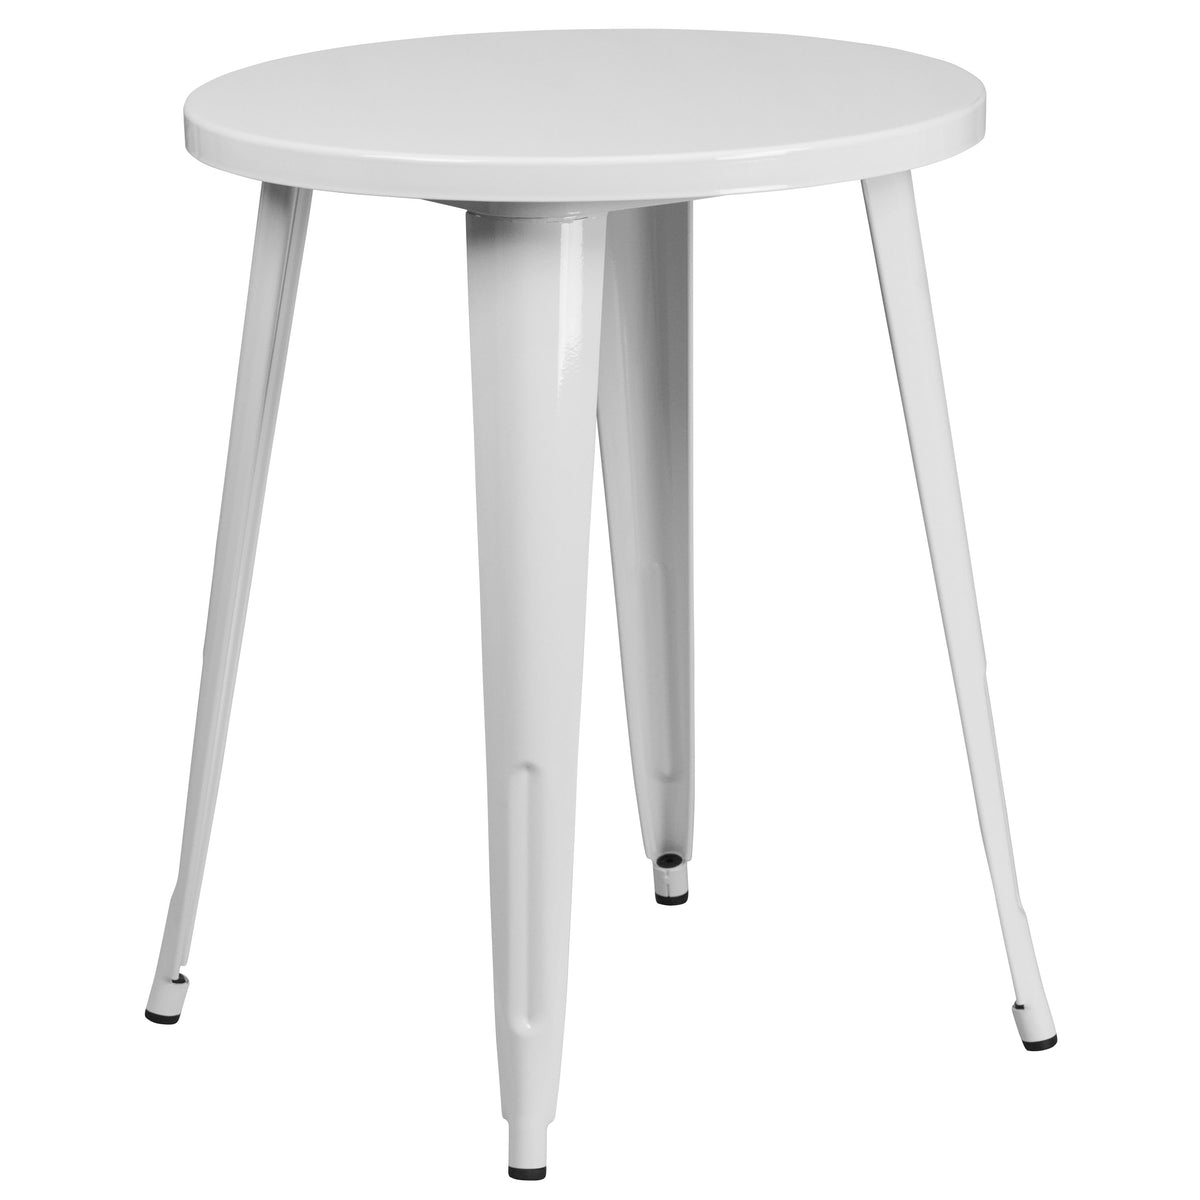 White |#| 24inch Round White Metal Indoor-Outdoor Table - Restaurant Furniture - Café Table